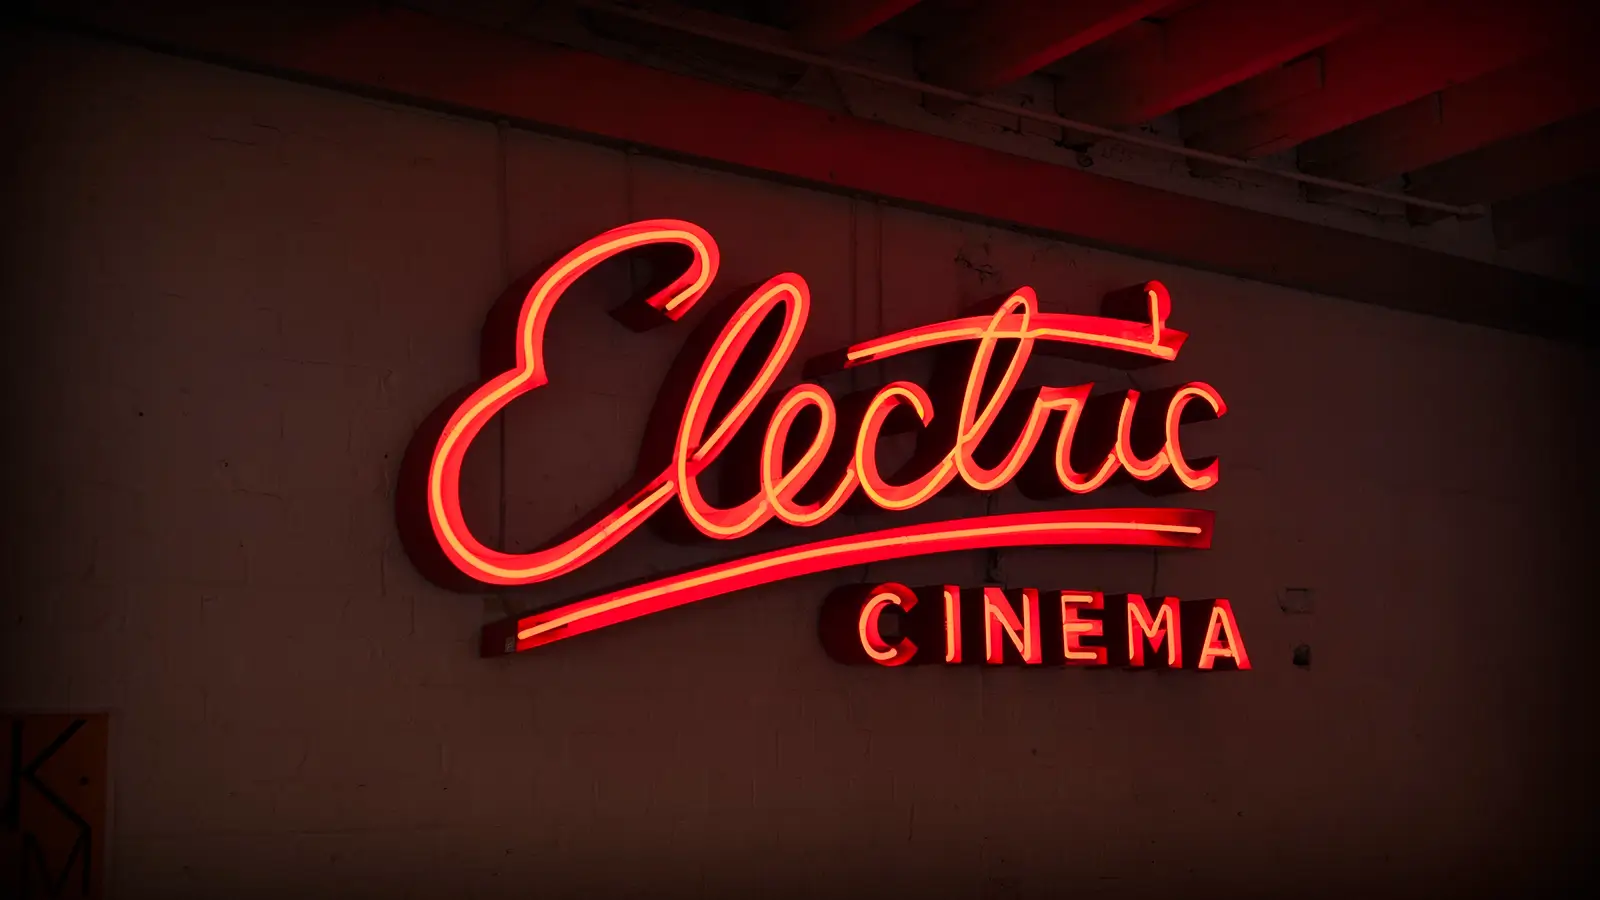 real neon sign electric cinema